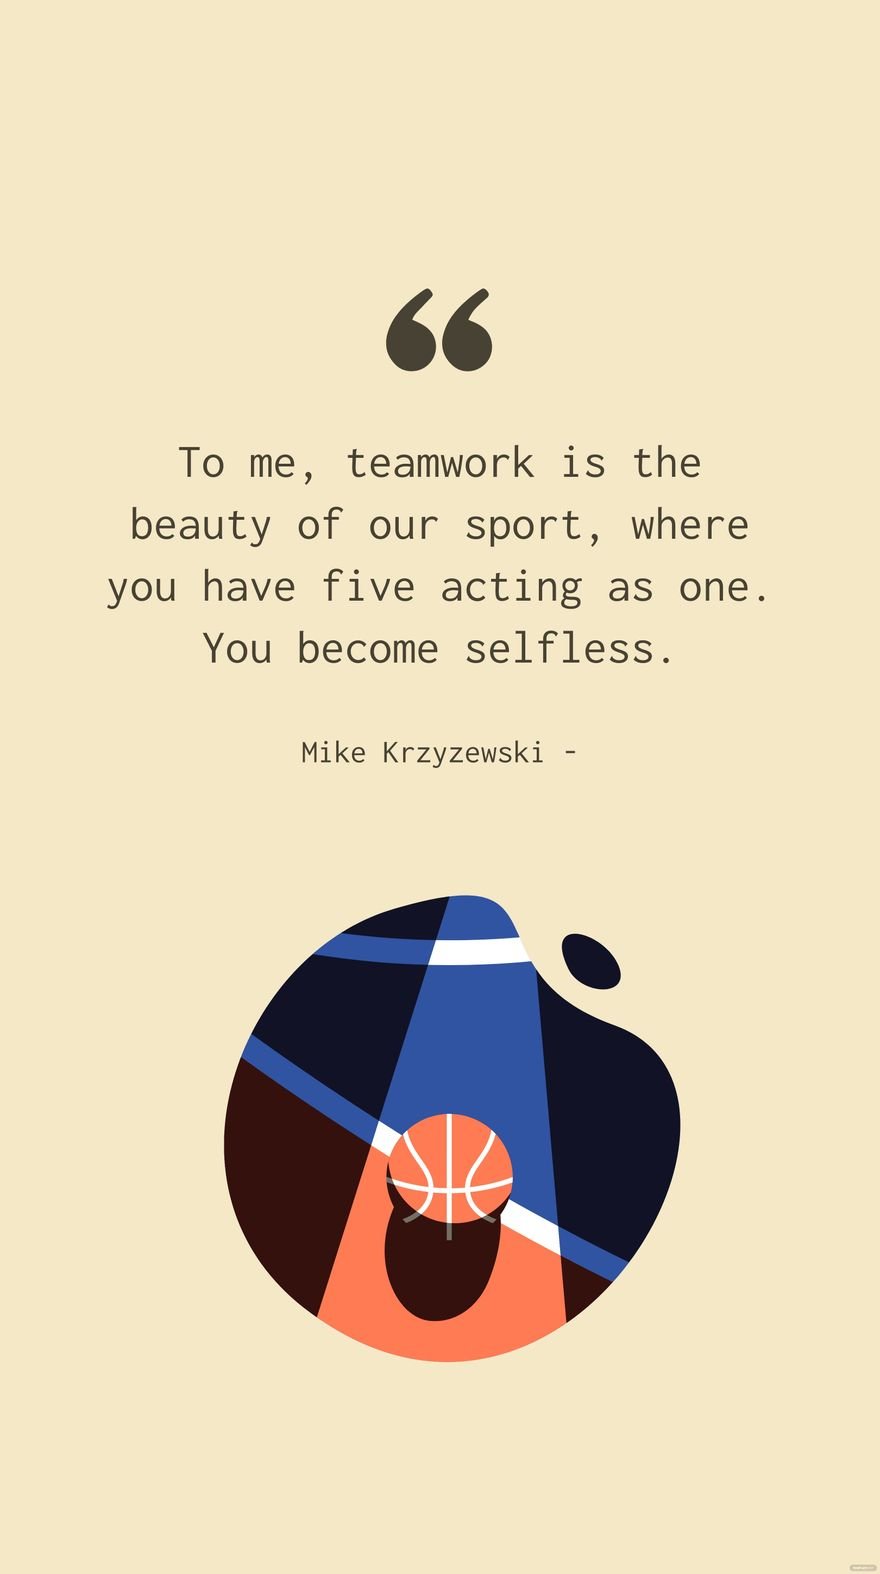 Free Mike Krzyzewski - To me, teamwork is the beauty of our sport, where you have five acting as one. You become selfless. in JPG